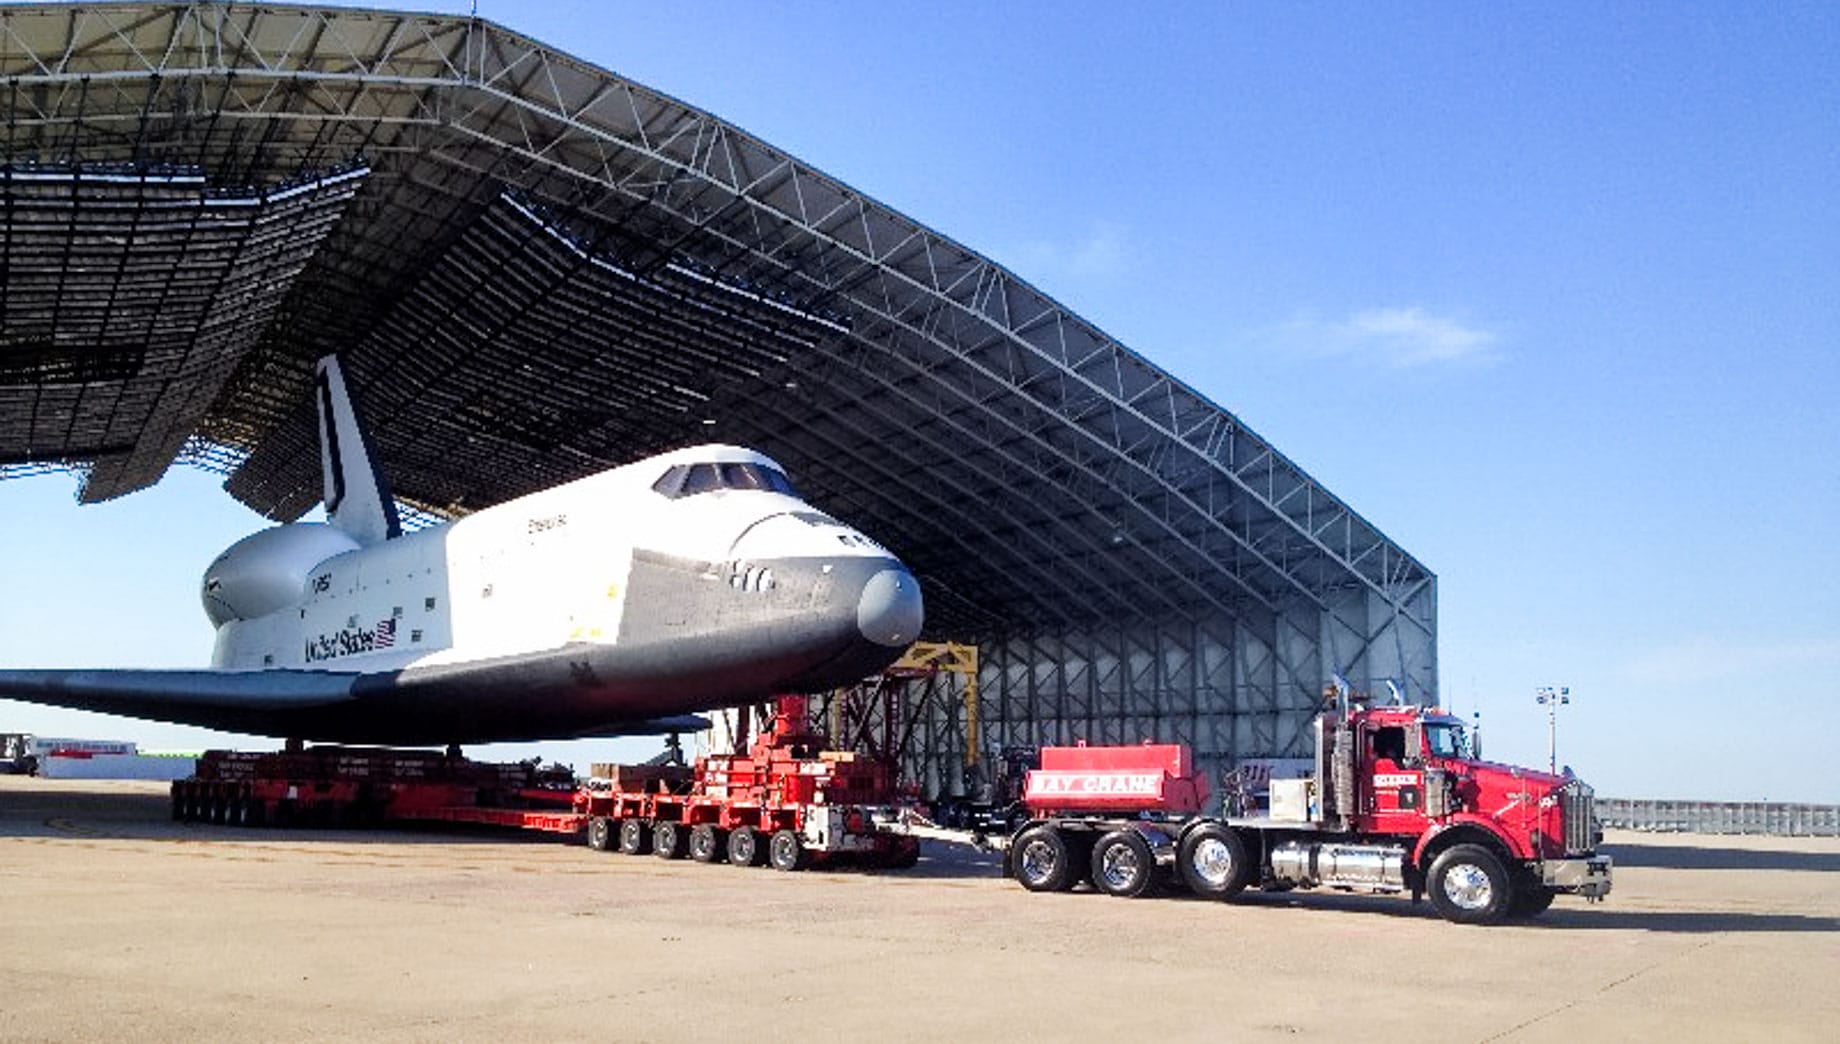 Truck transporting space shuttle from hangar